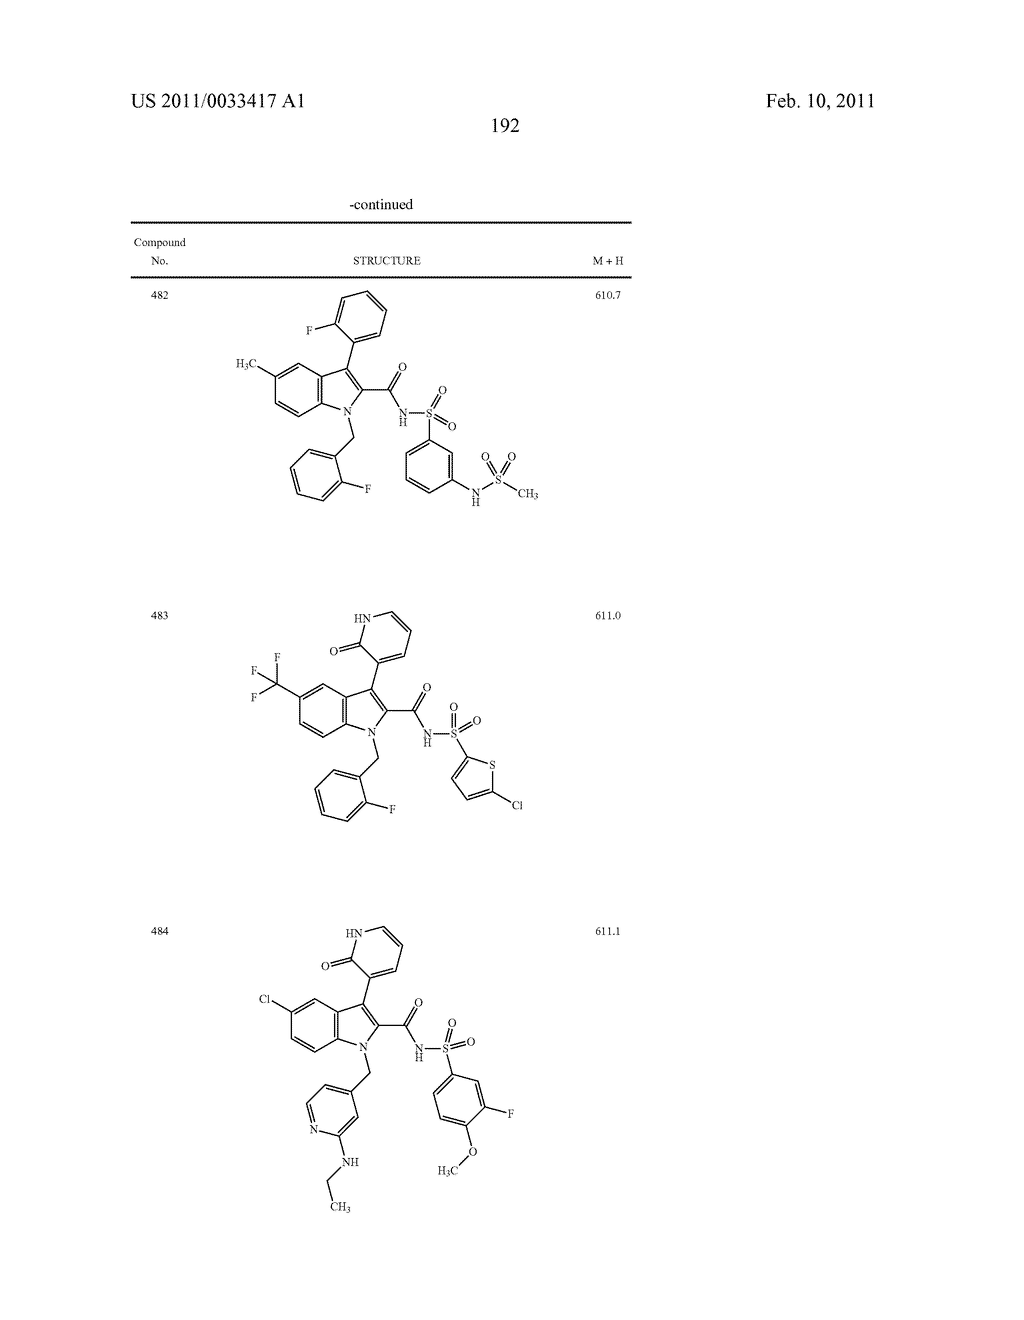 2,3-SUBSTITUTED INDOLE DERIVATIVES FOR TREATING VIRAL INFECTIONS - diagram, schematic, and image 193